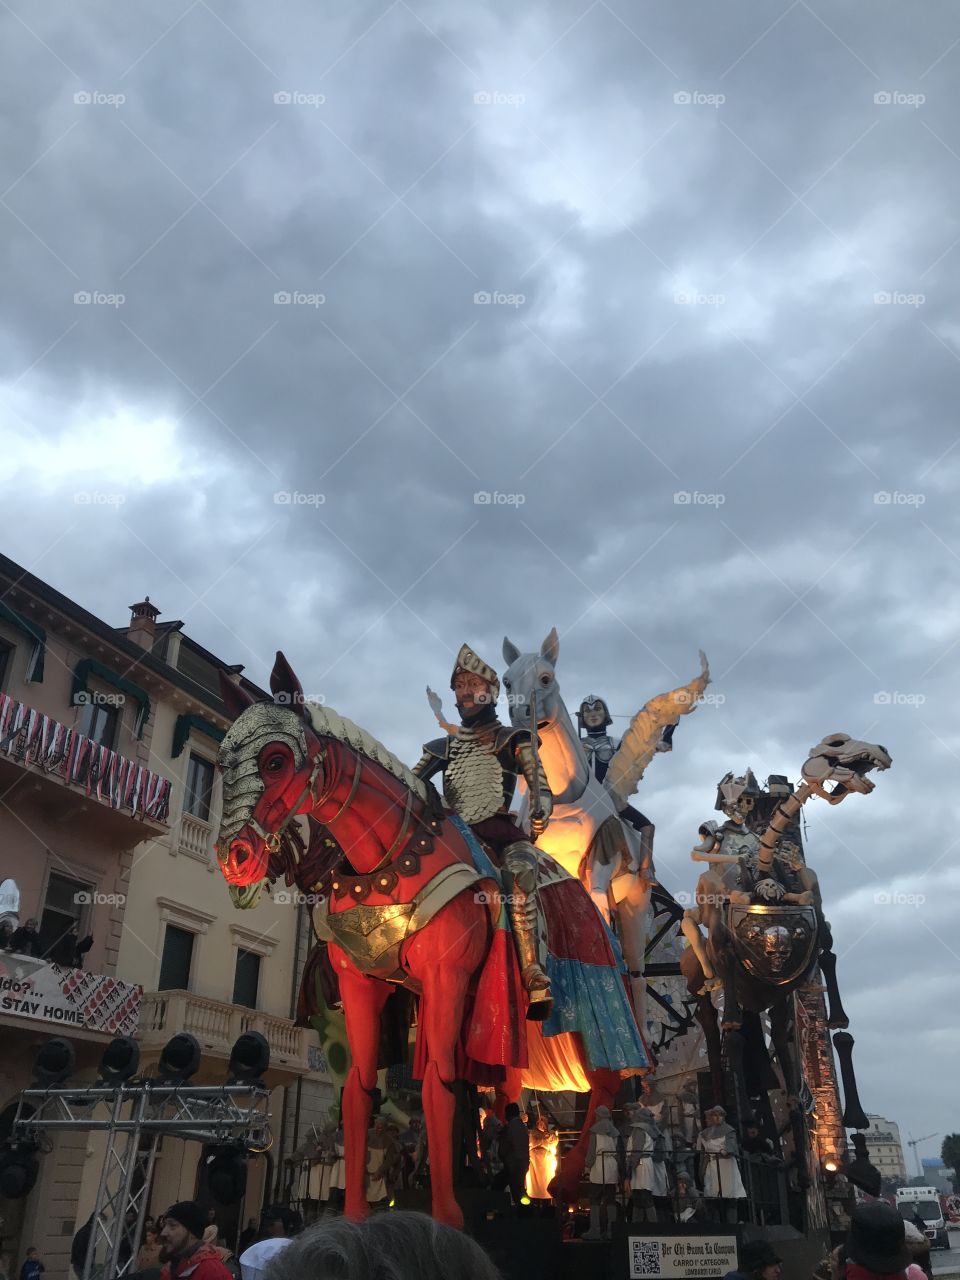 Life and death depicted by horses on a float at the Carnival in Viareggio, Italy.🐎